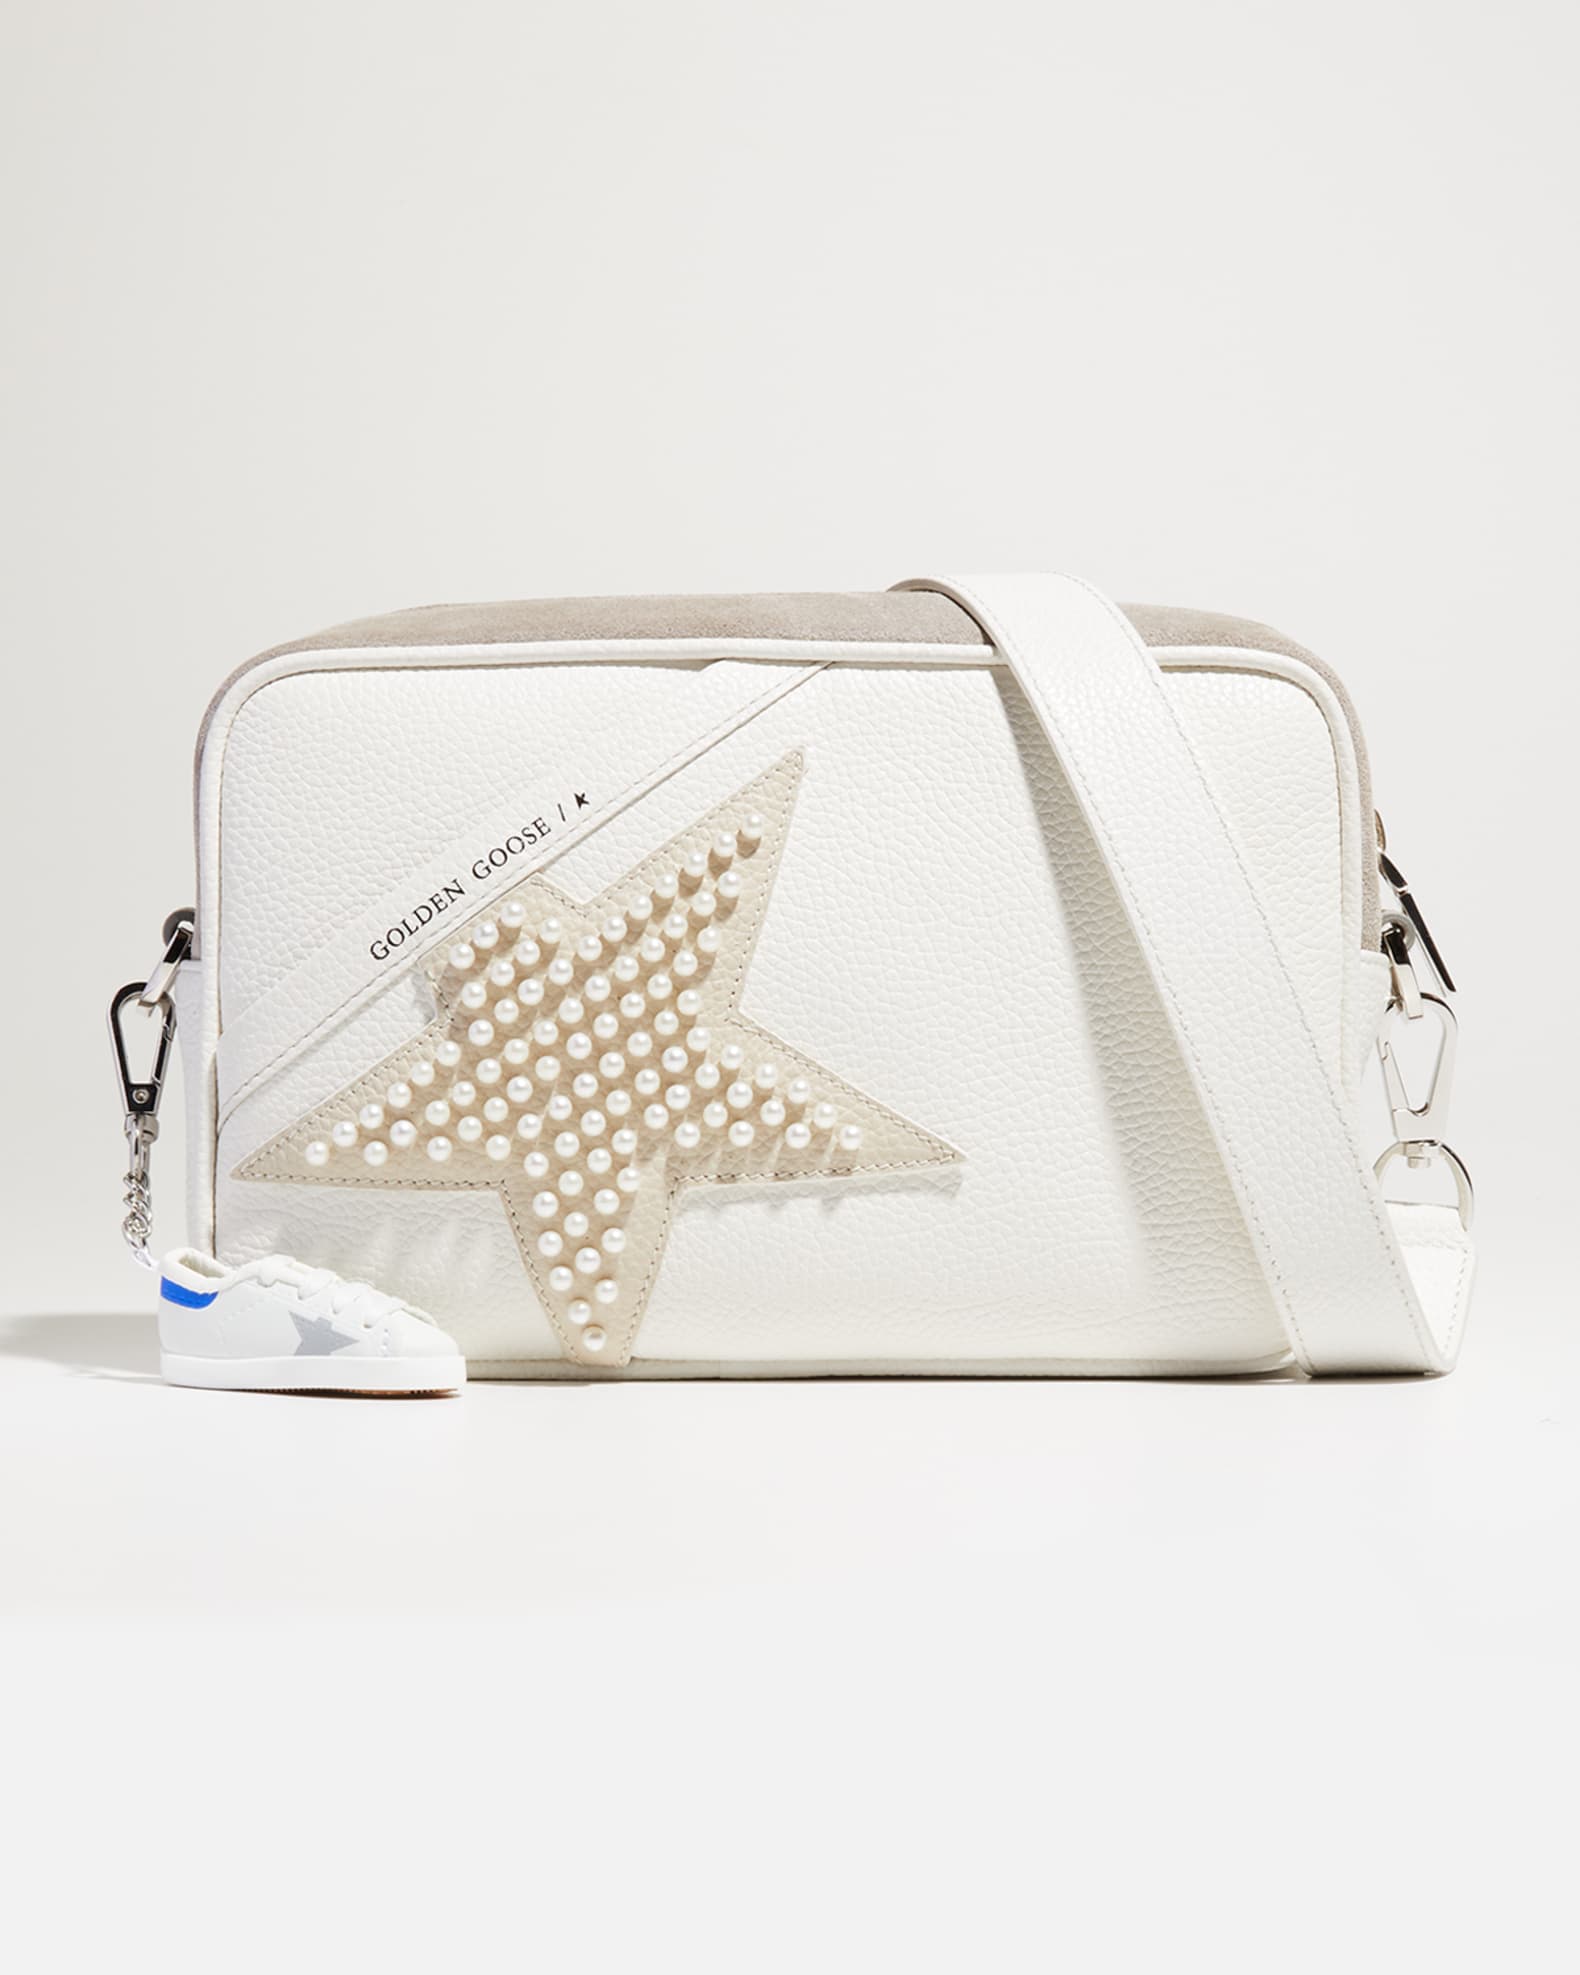 Golden Goose Pearly Star Mix-Leather Camera Crossbody Bag | Neiman Marcus